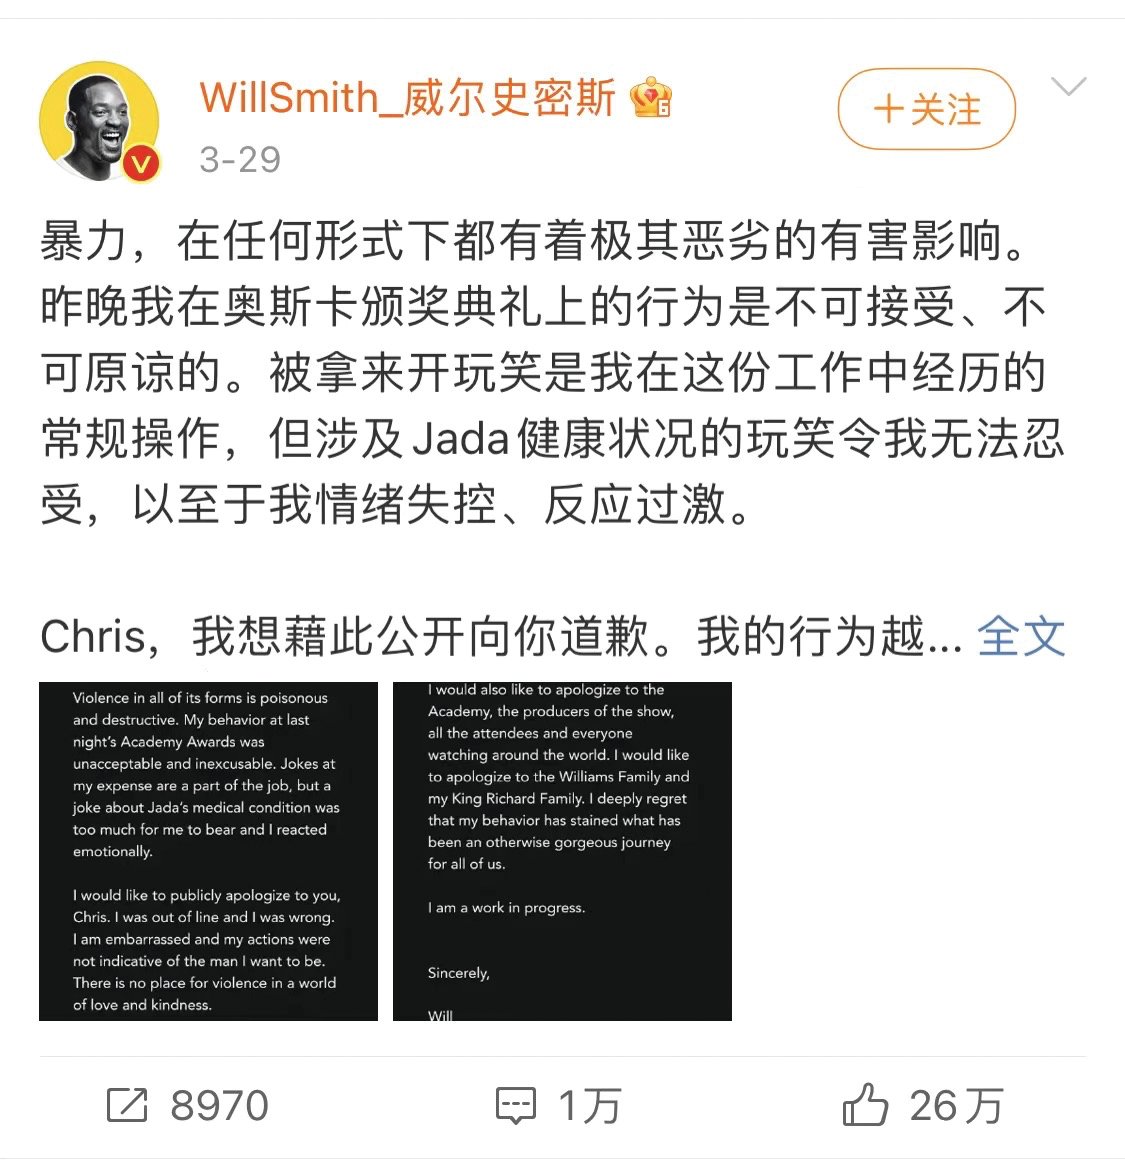 Will Smith’s apology statement appeared simultaneously on his Facebook page and on Weibo, China’s combination of Facebook and Twitter, both of which are blocked by the Chinese government..